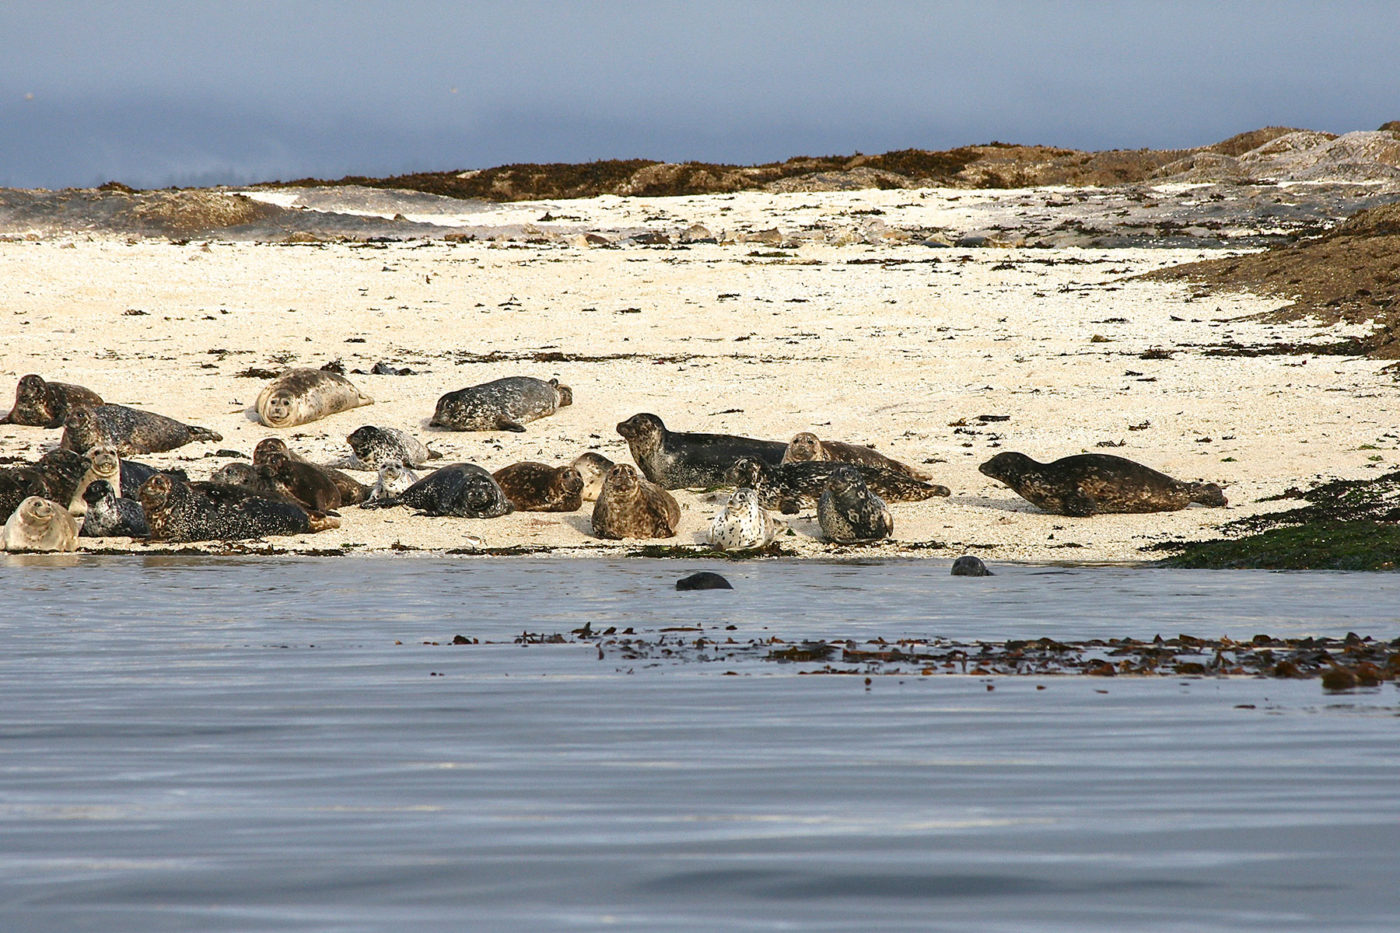 Harbor Seals hauled out on the shore.